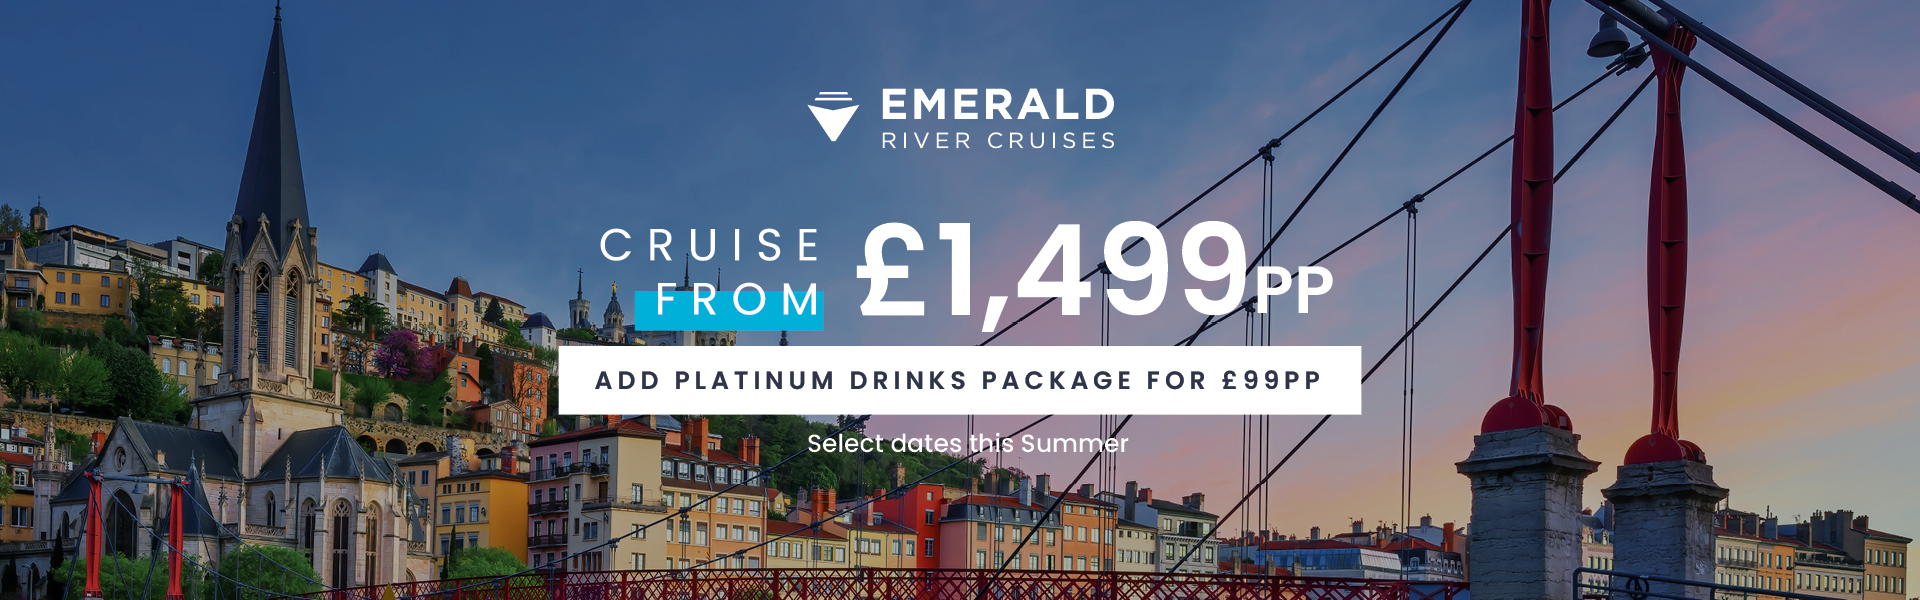 Emerald River Cruises - Cruise from £1,499pp